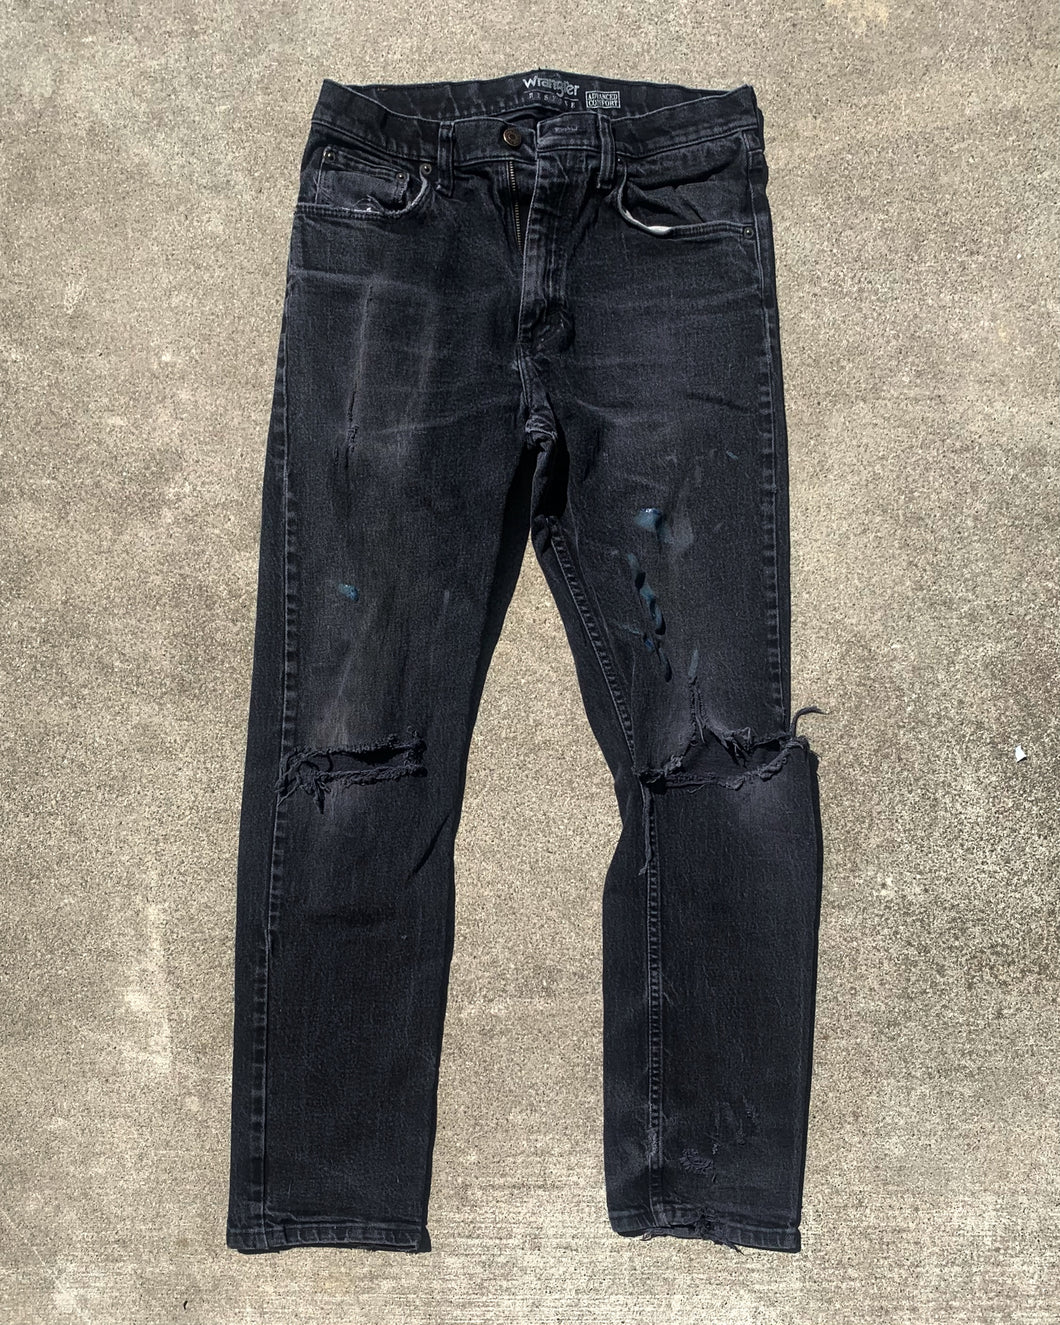 Wrangler Dark Grey Thrashed and Stained Jeans